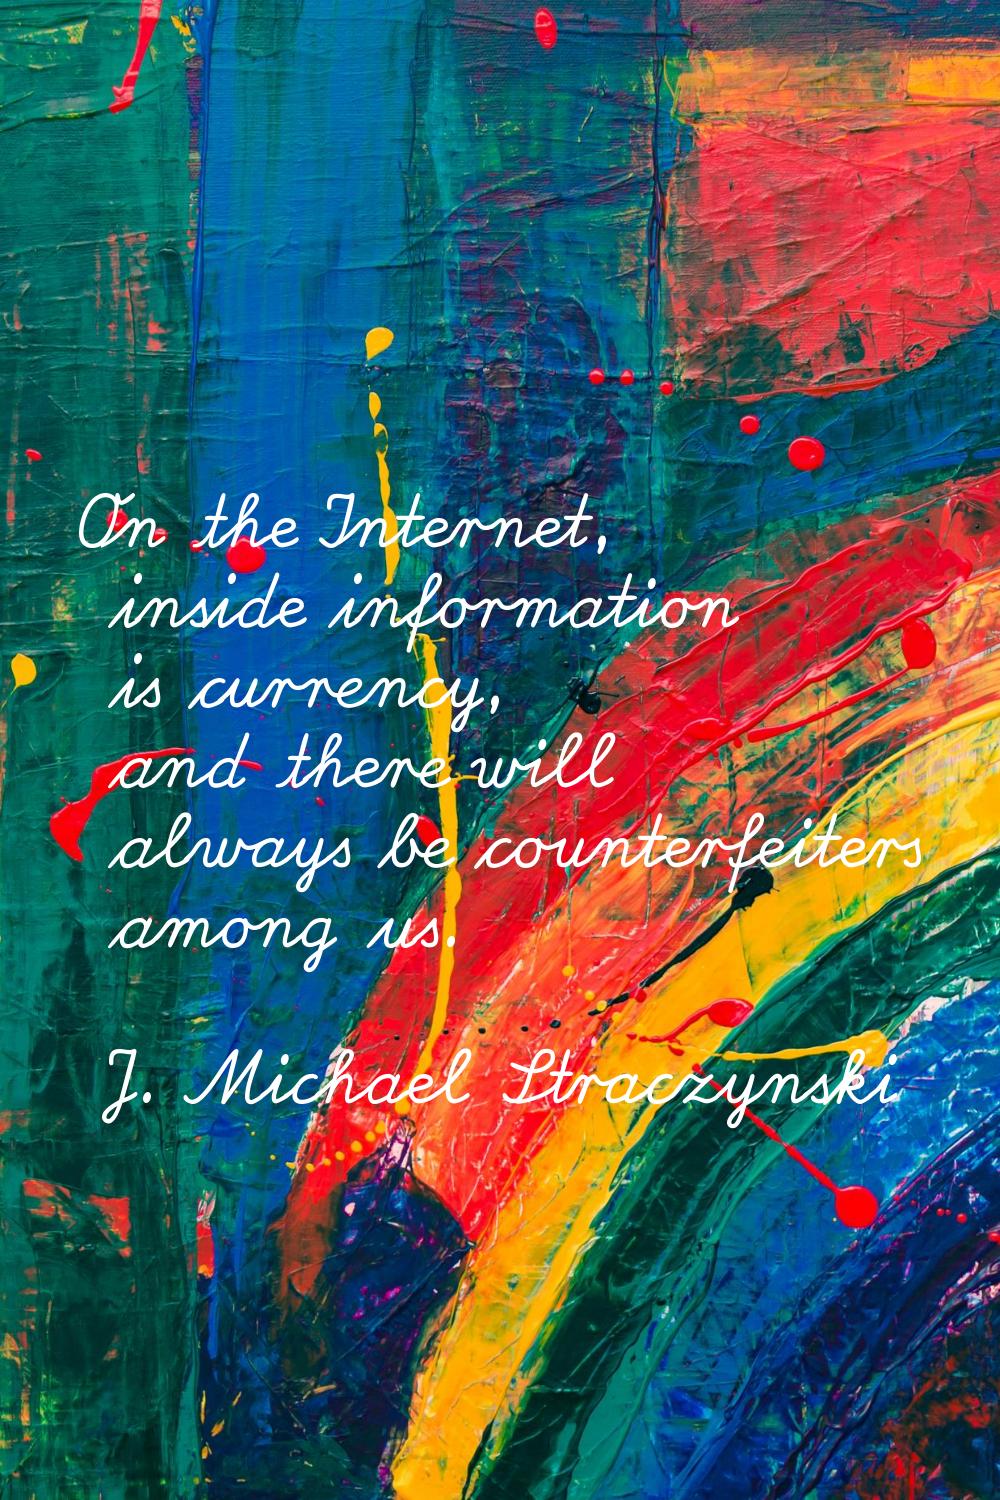 On the Internet, inside information is currency, and there will always be counterfeiters among us.